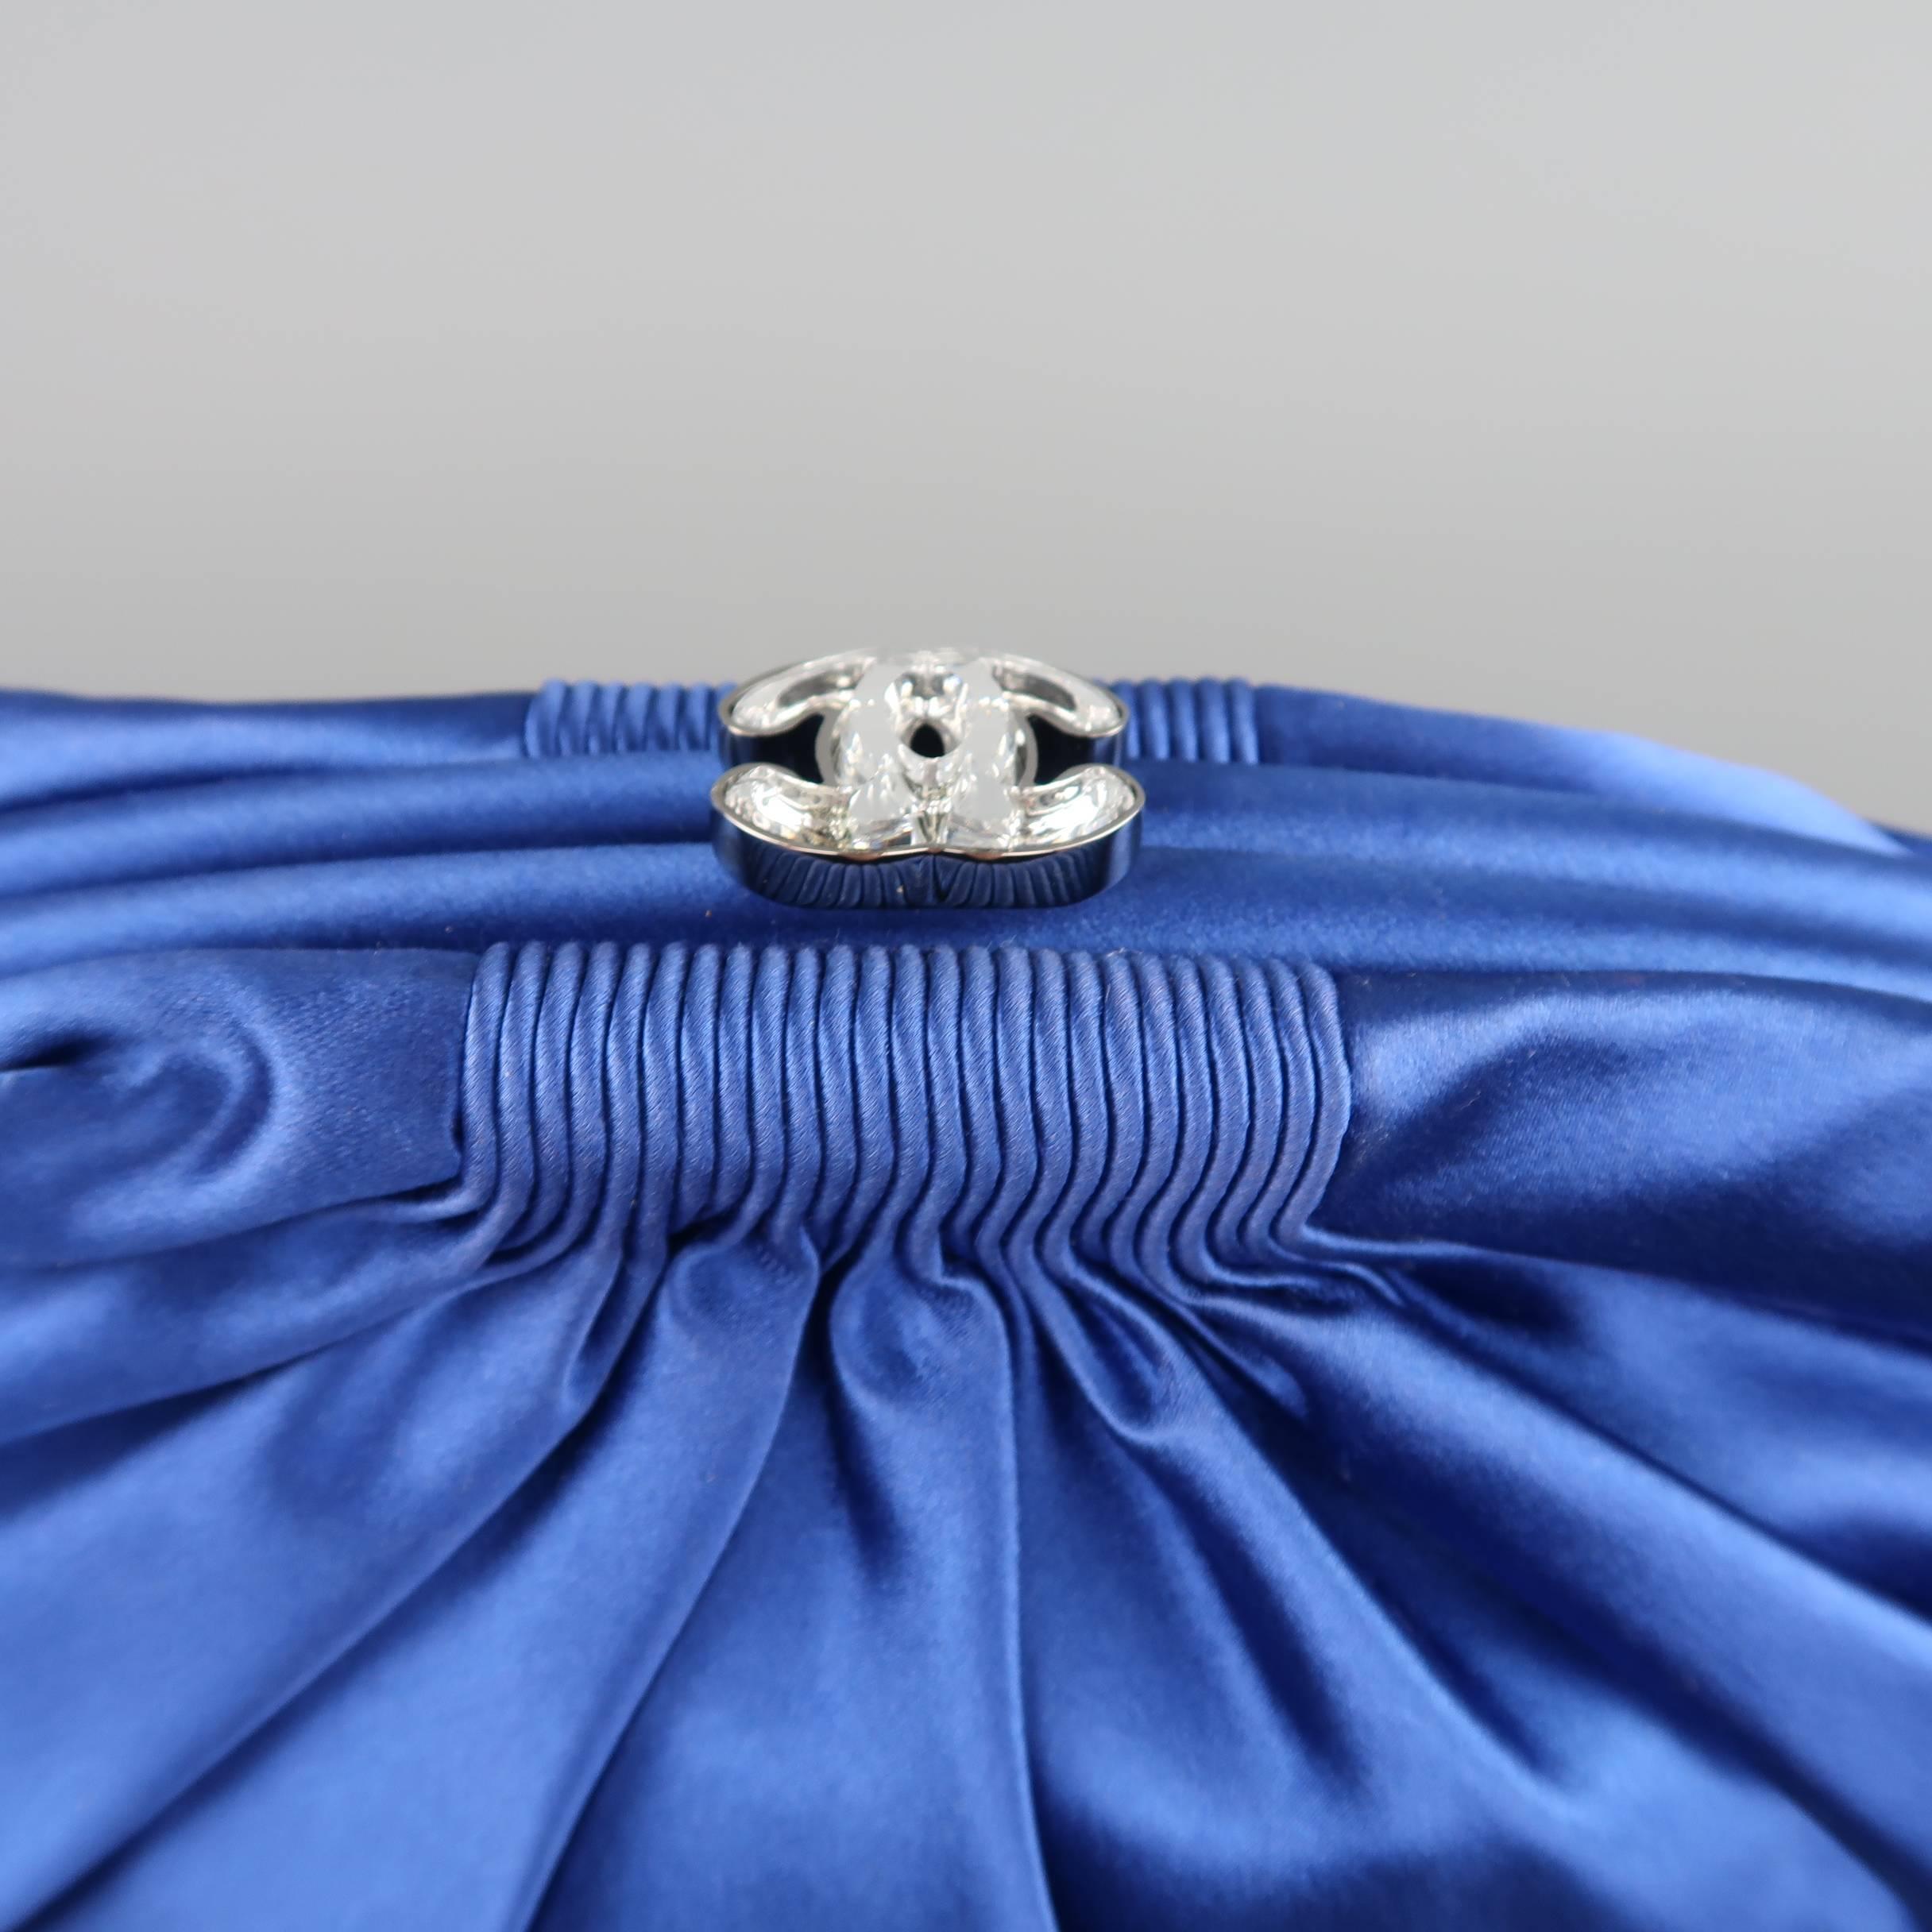 Gorgeous CHANEL evening clutch comes in sapphire blue silk satin and features a pleated construction and a clasp lock closure with clear crystal CC logo embellishment. Made in Italy.

Retails at: $2,150.00
Good Pre-Owned Condition.
Marked: 1372677
